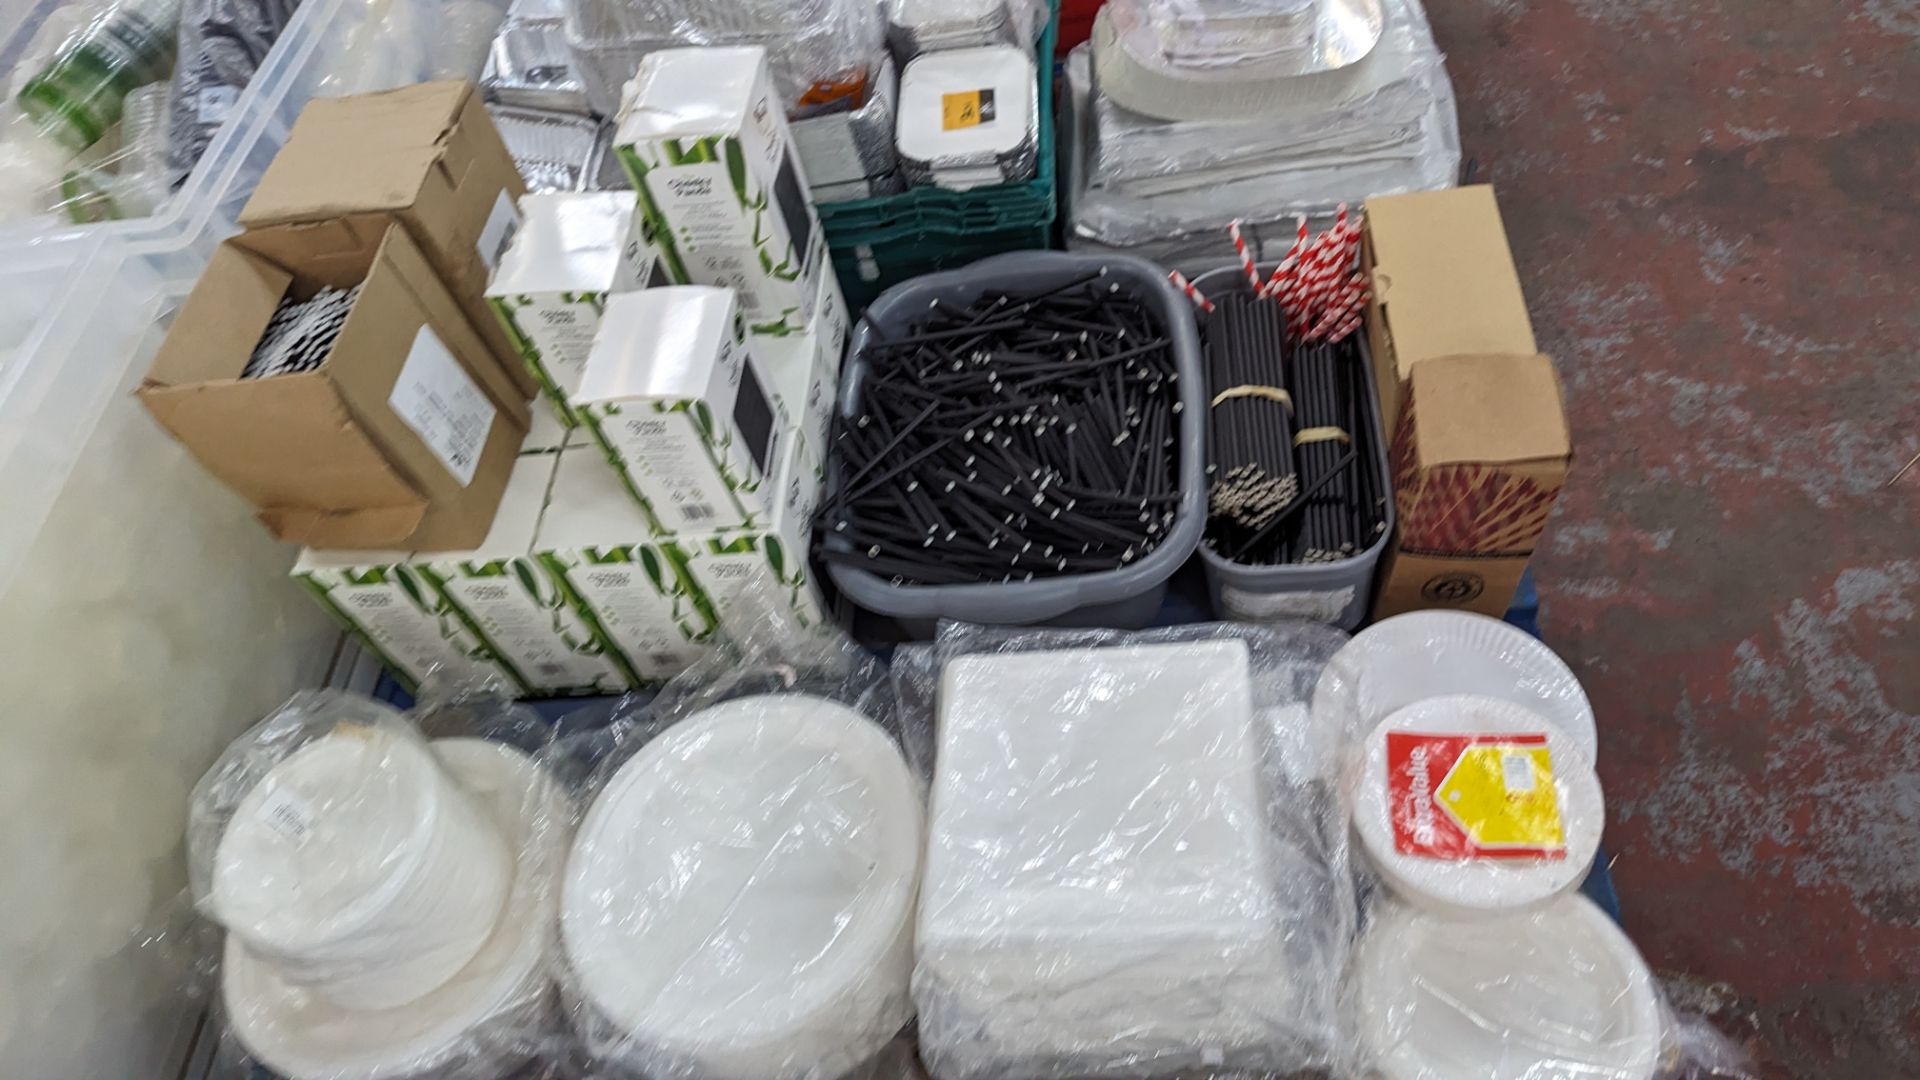 The contents of a pallet of disposable items including foil trays & lids, straws, plates & more. NB - Image 11 of 12